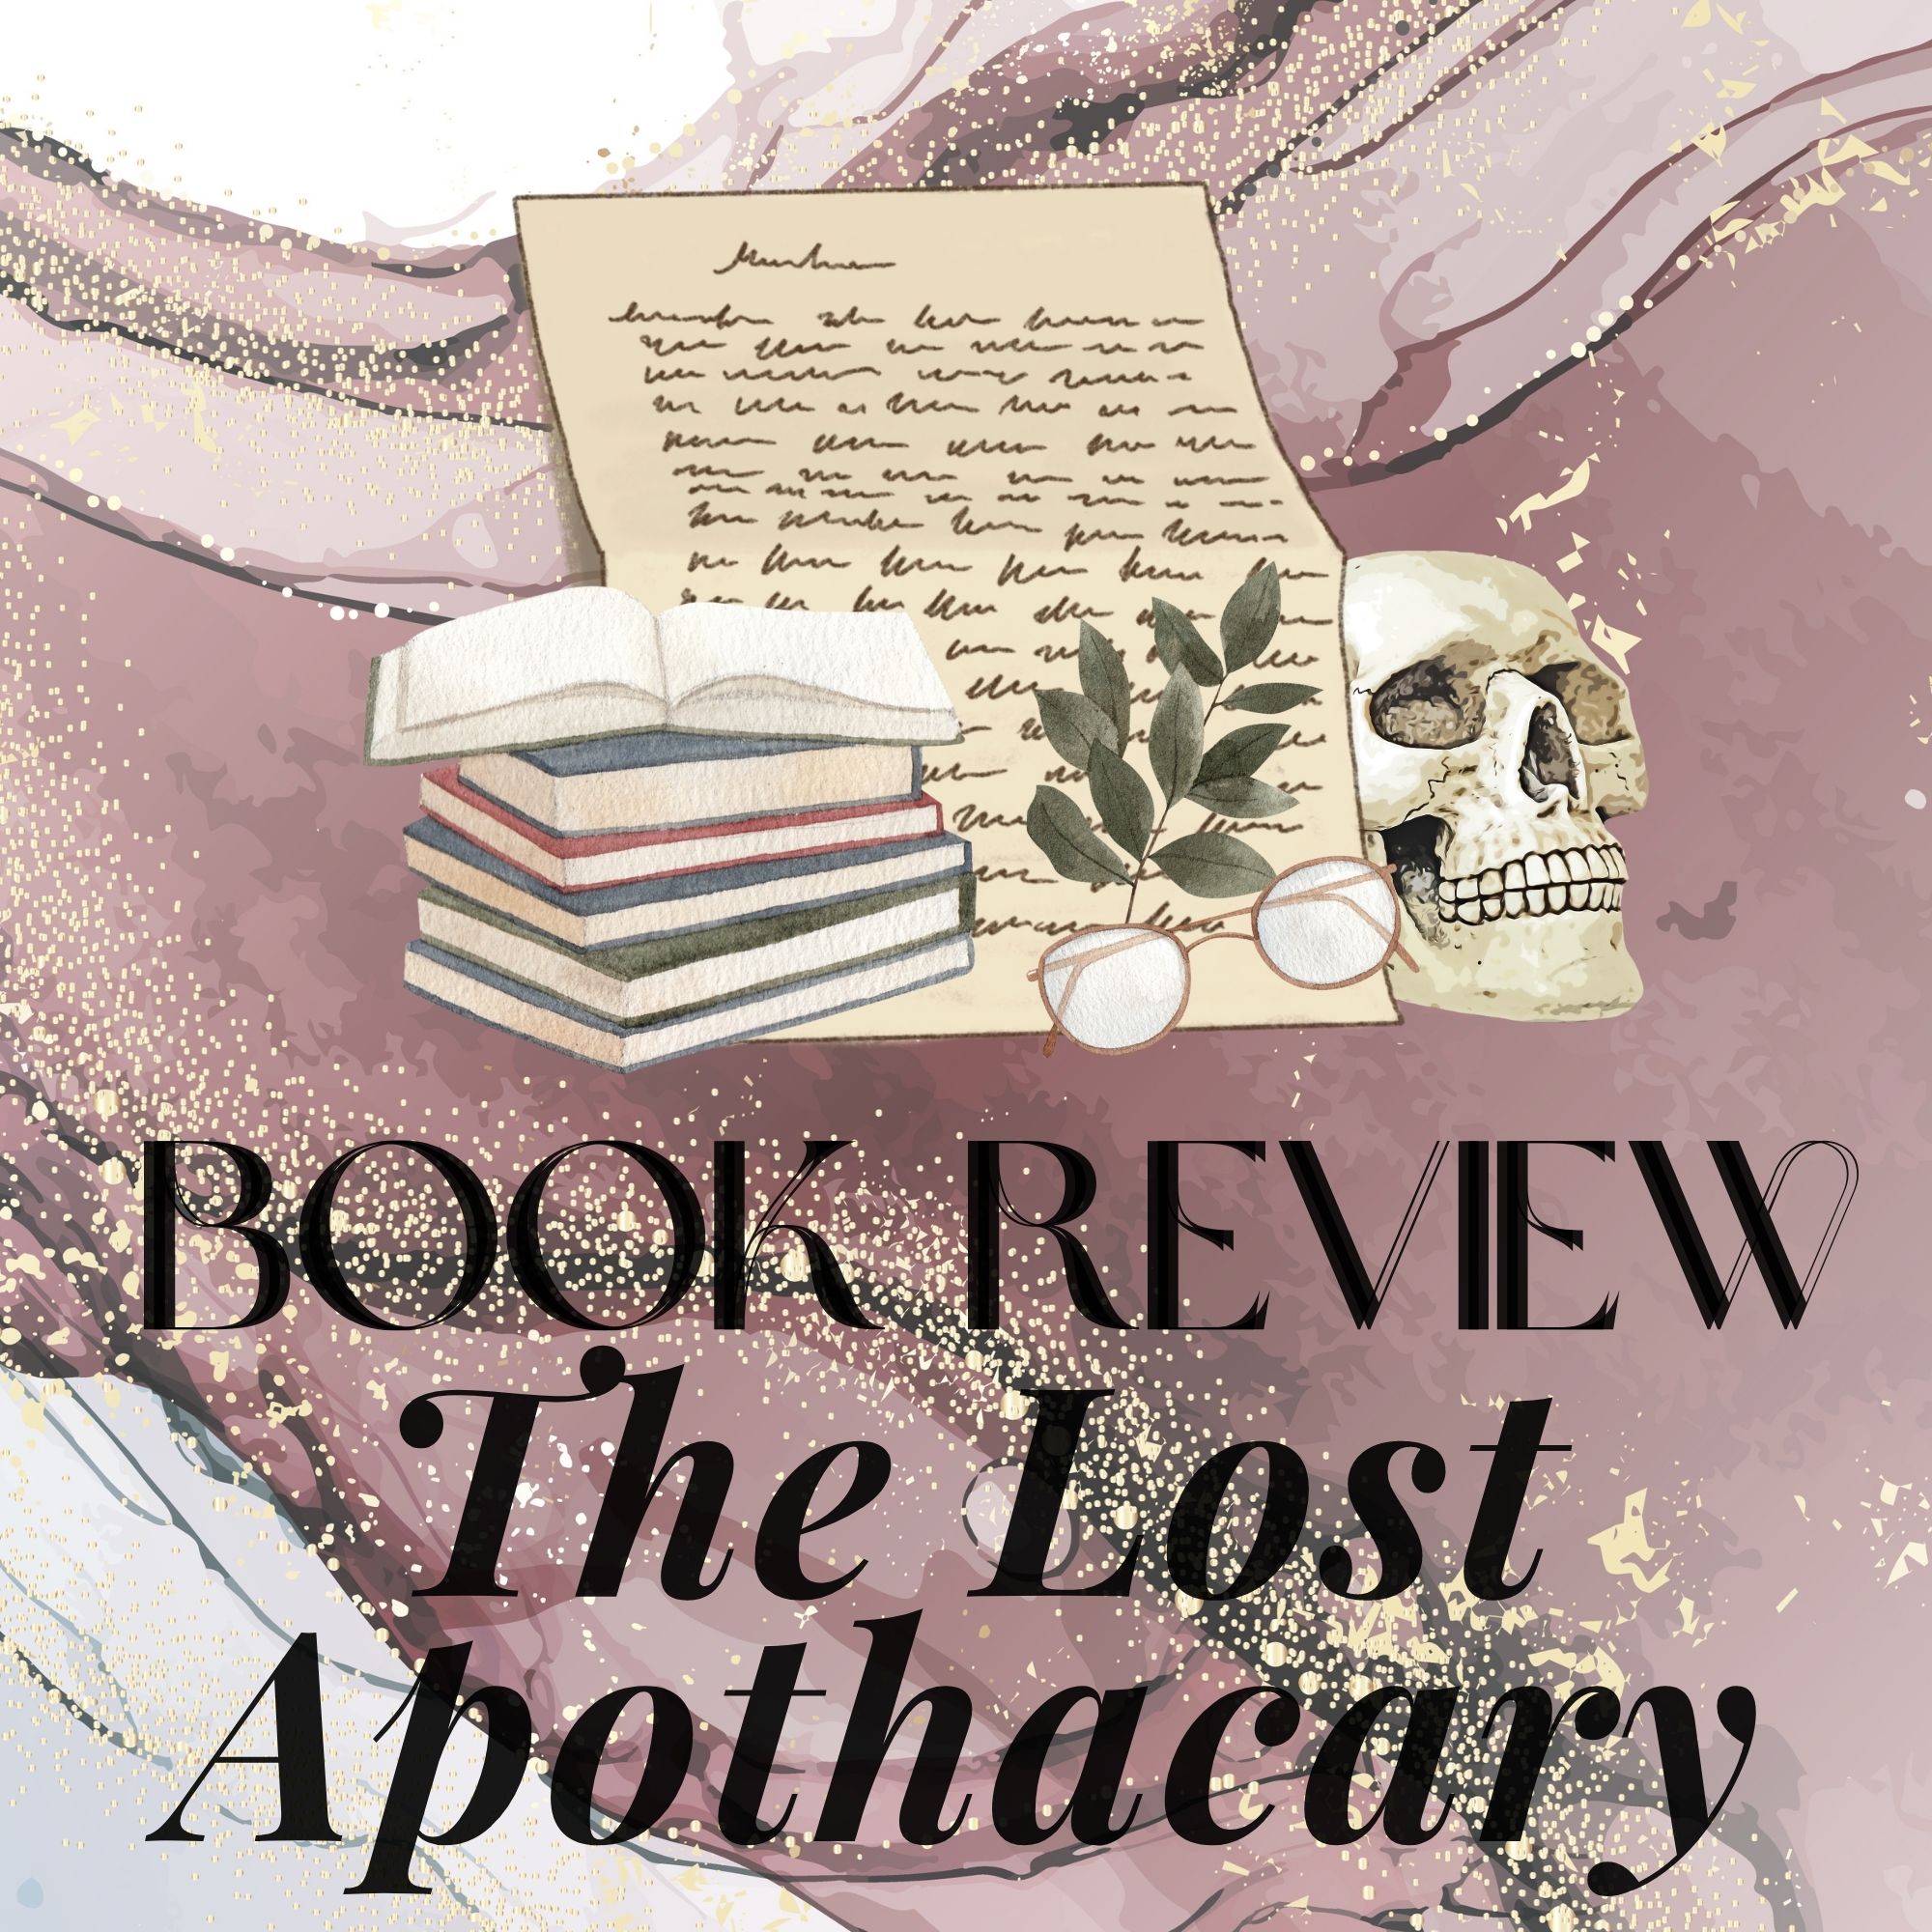 Good Reads Challenge Book Review:  The Lost Apathocary